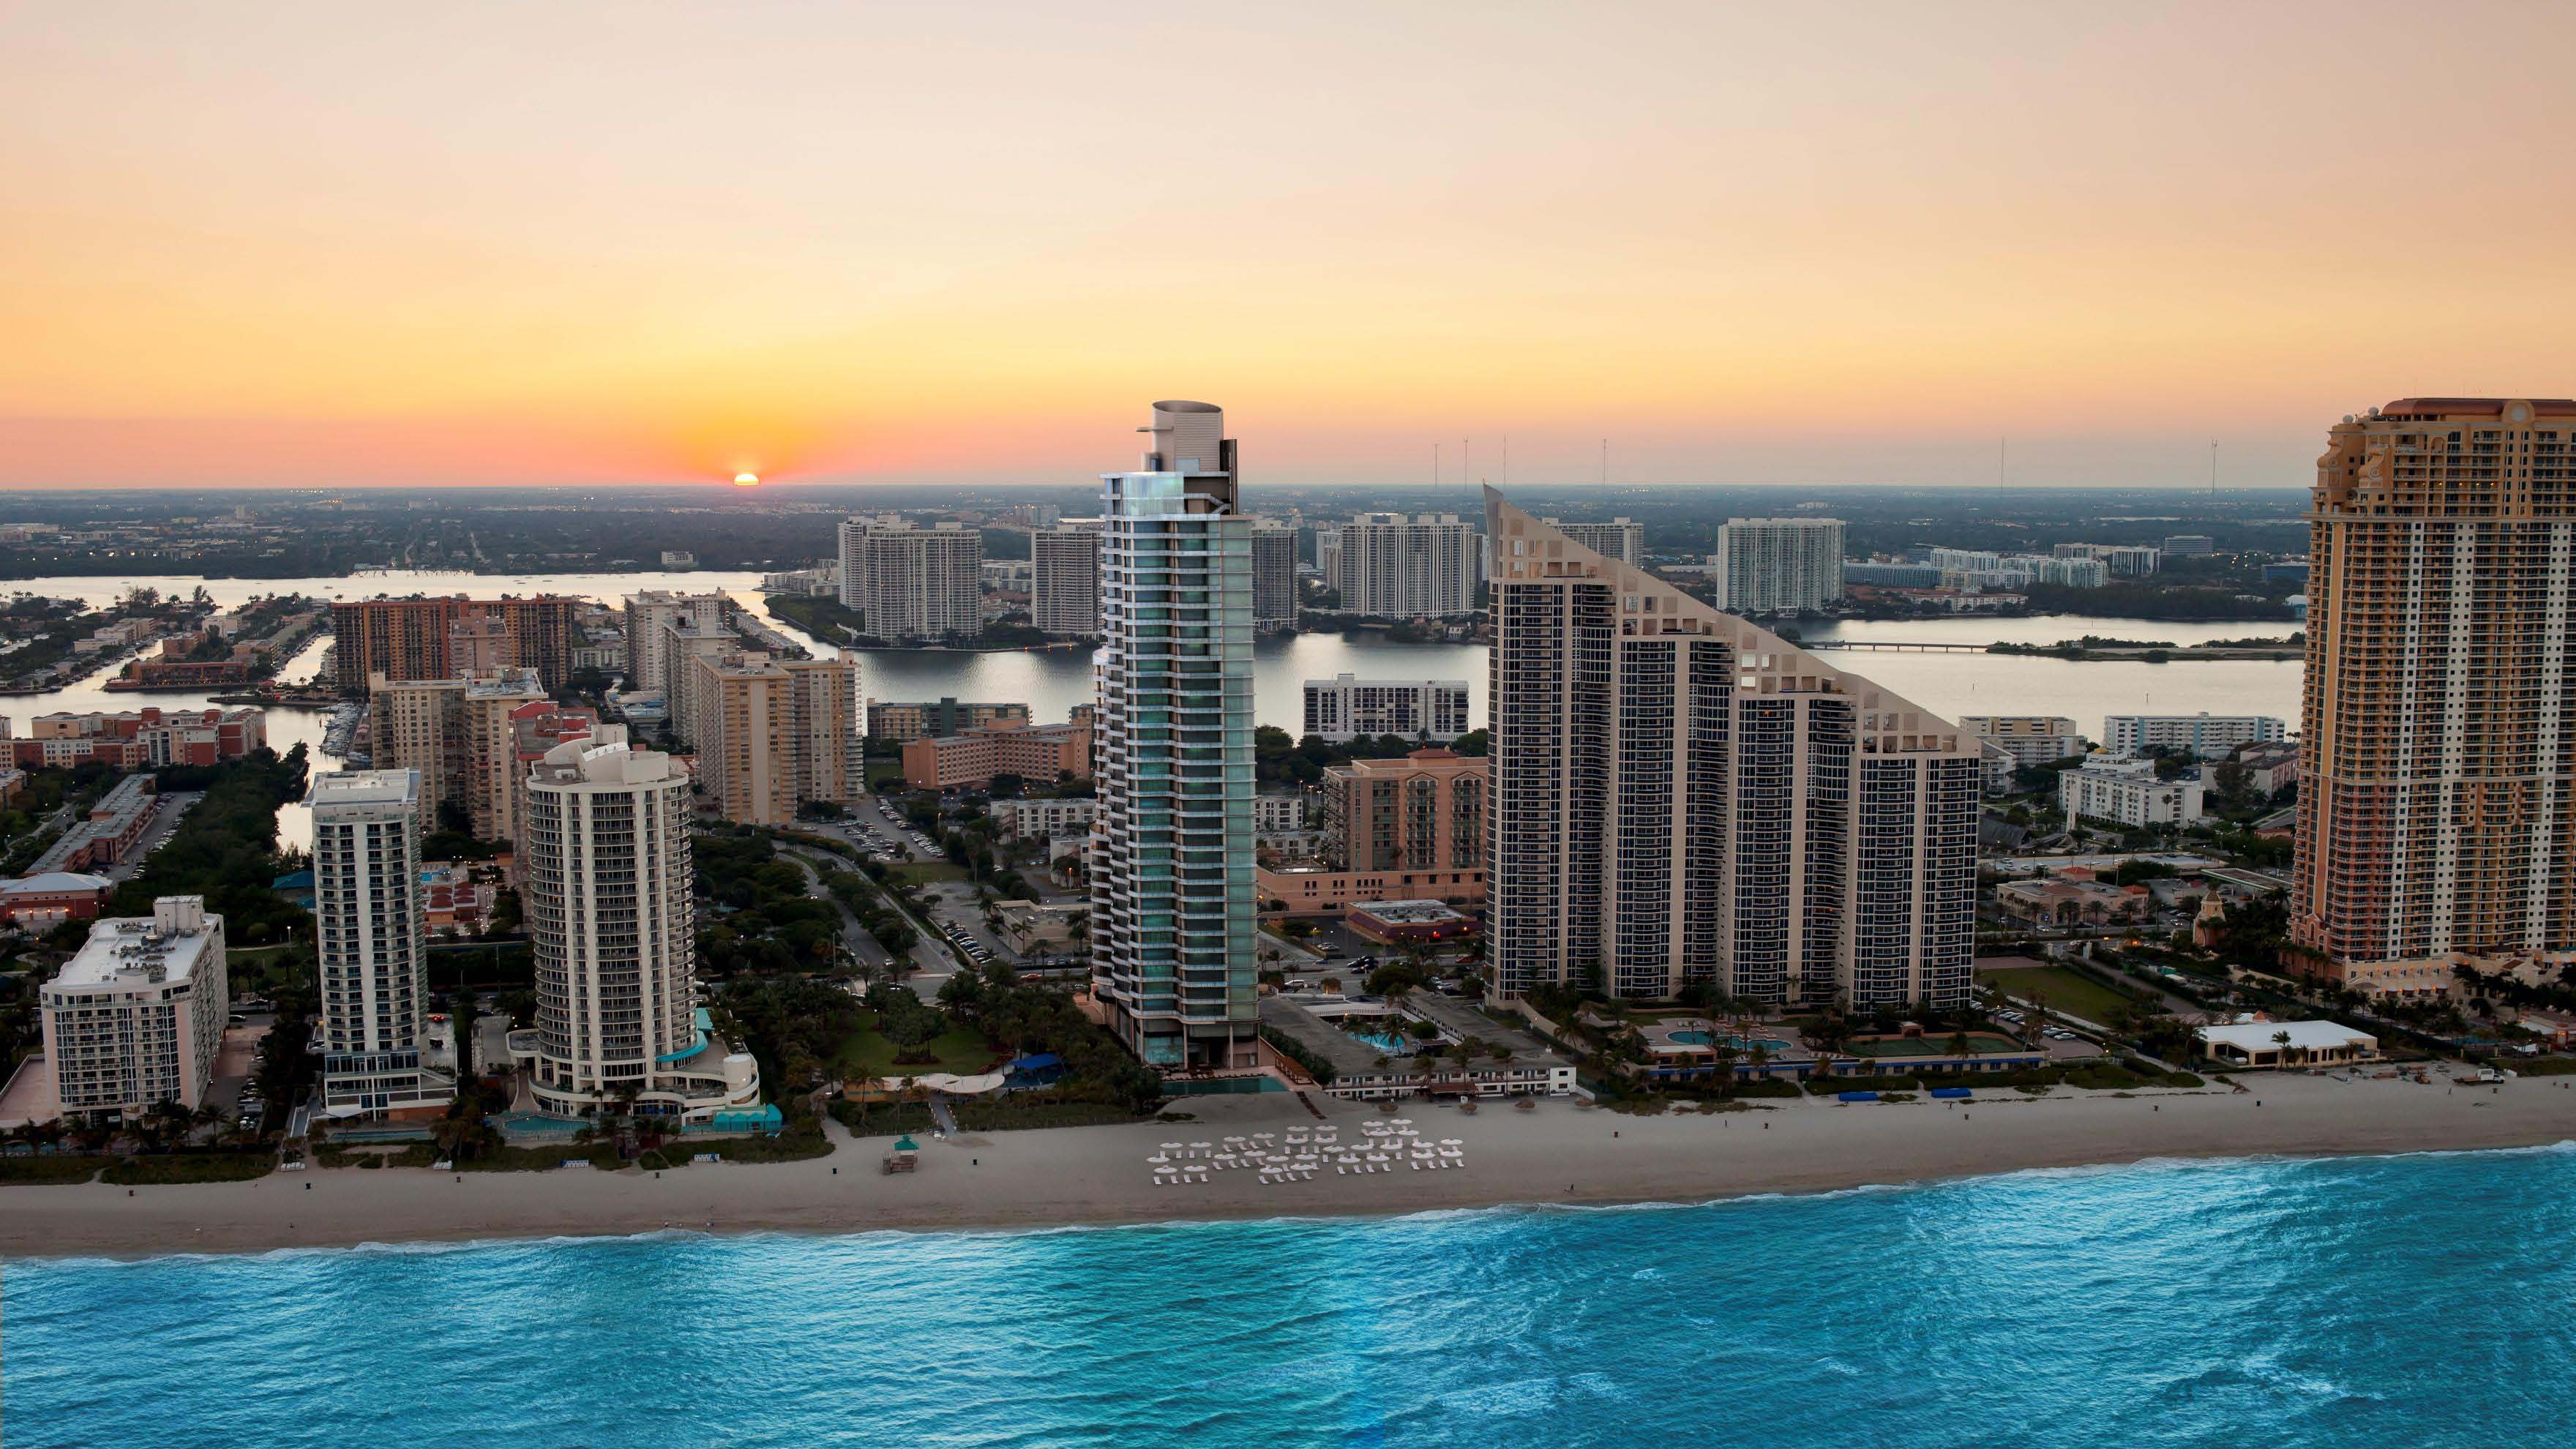 Nice Images Collection: Sunny Isles Beach Desktop Wallpapers